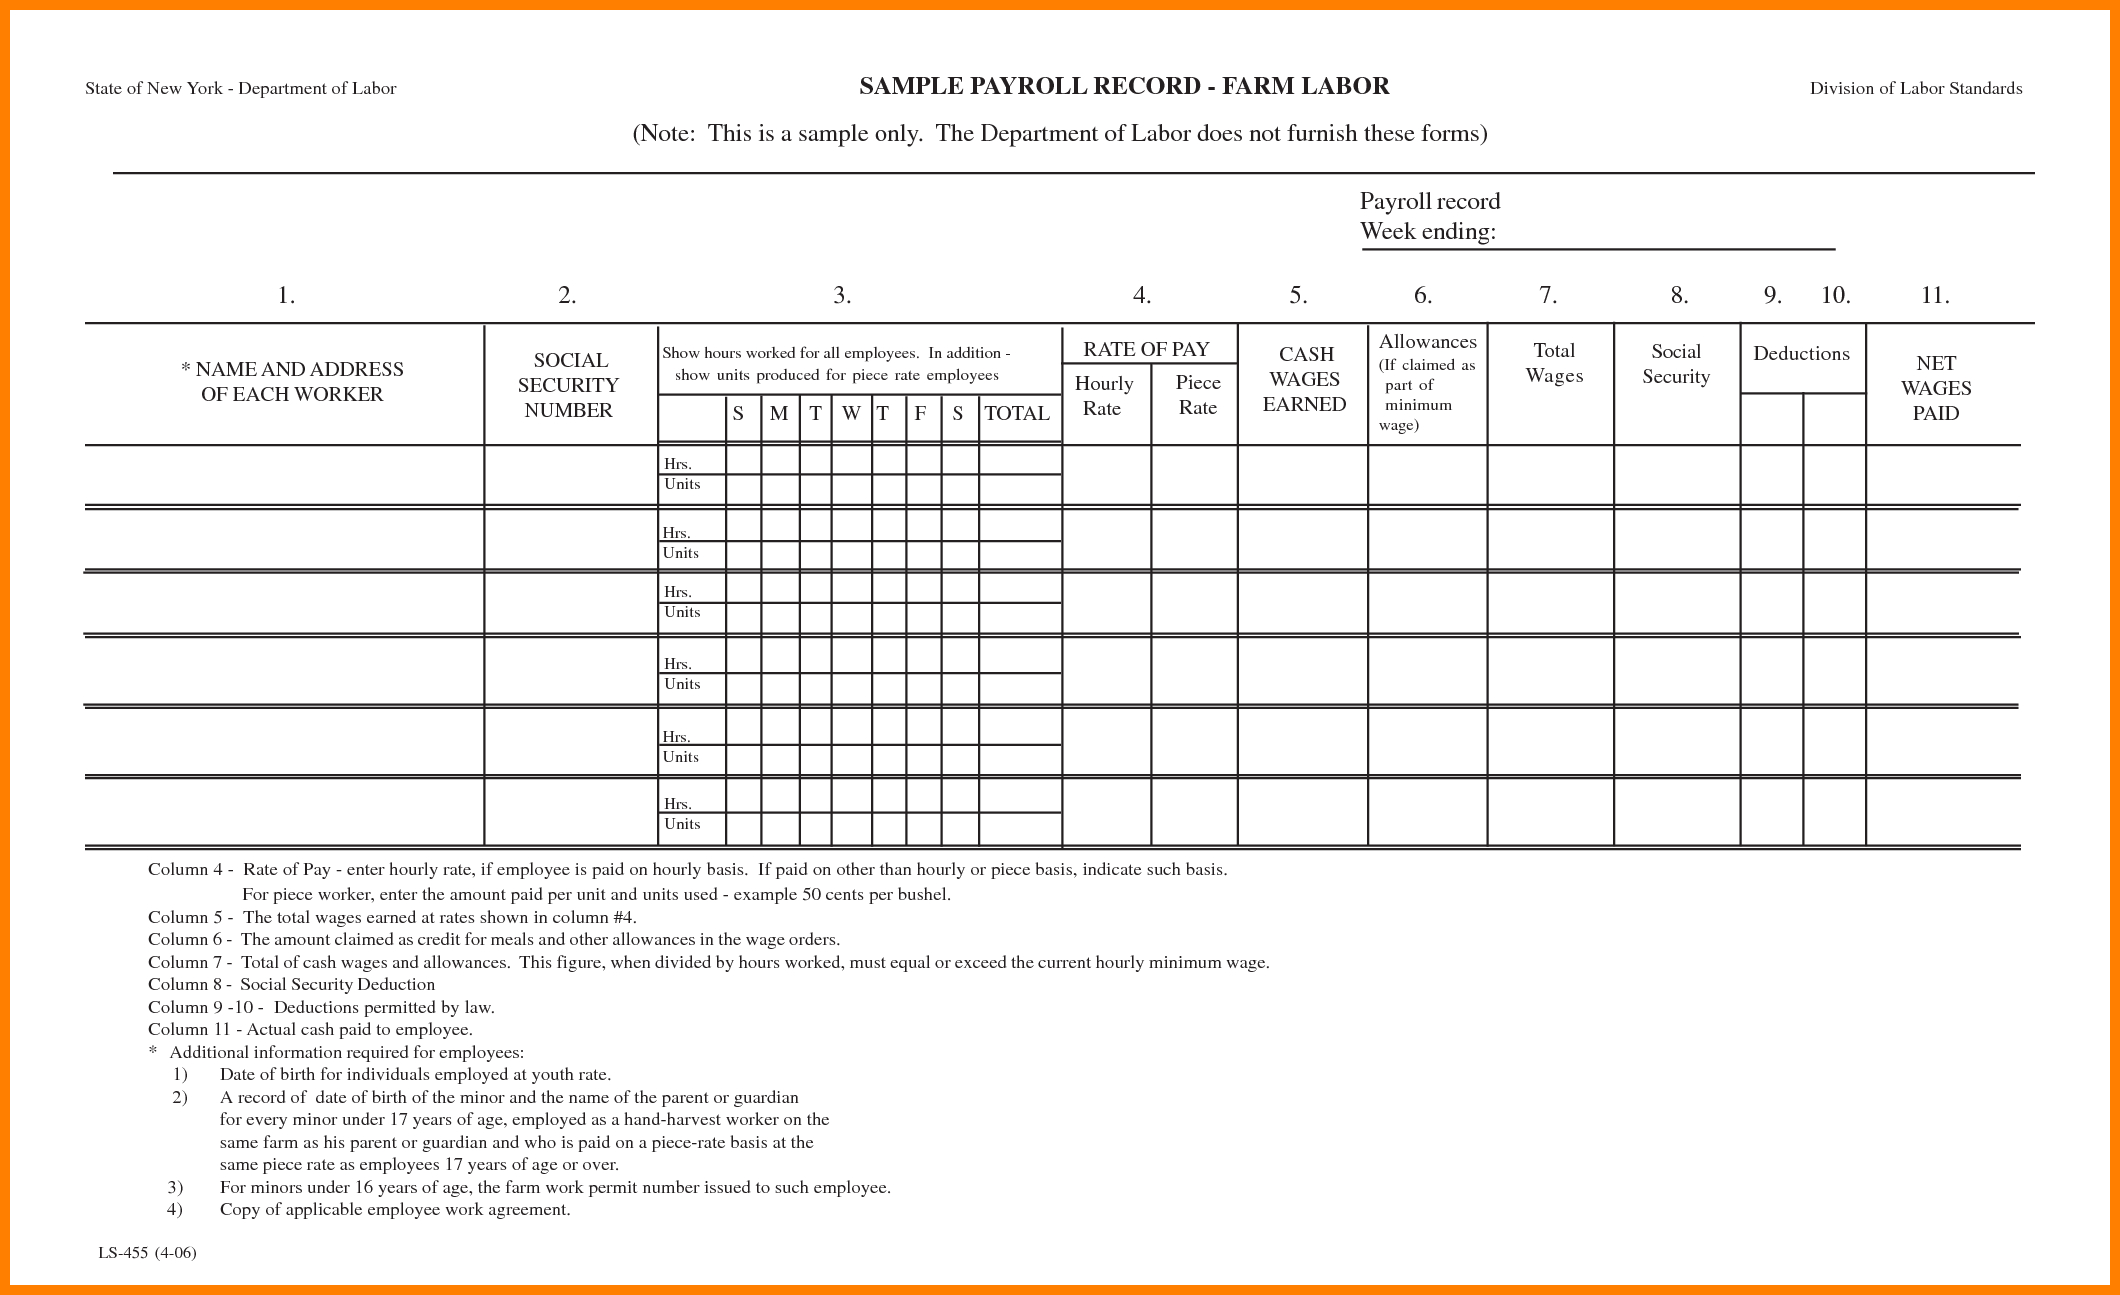 Free Spreadsheet Forms with regard to Payroll Sheet Sample Free Printable Forms Maggihub Ruralco